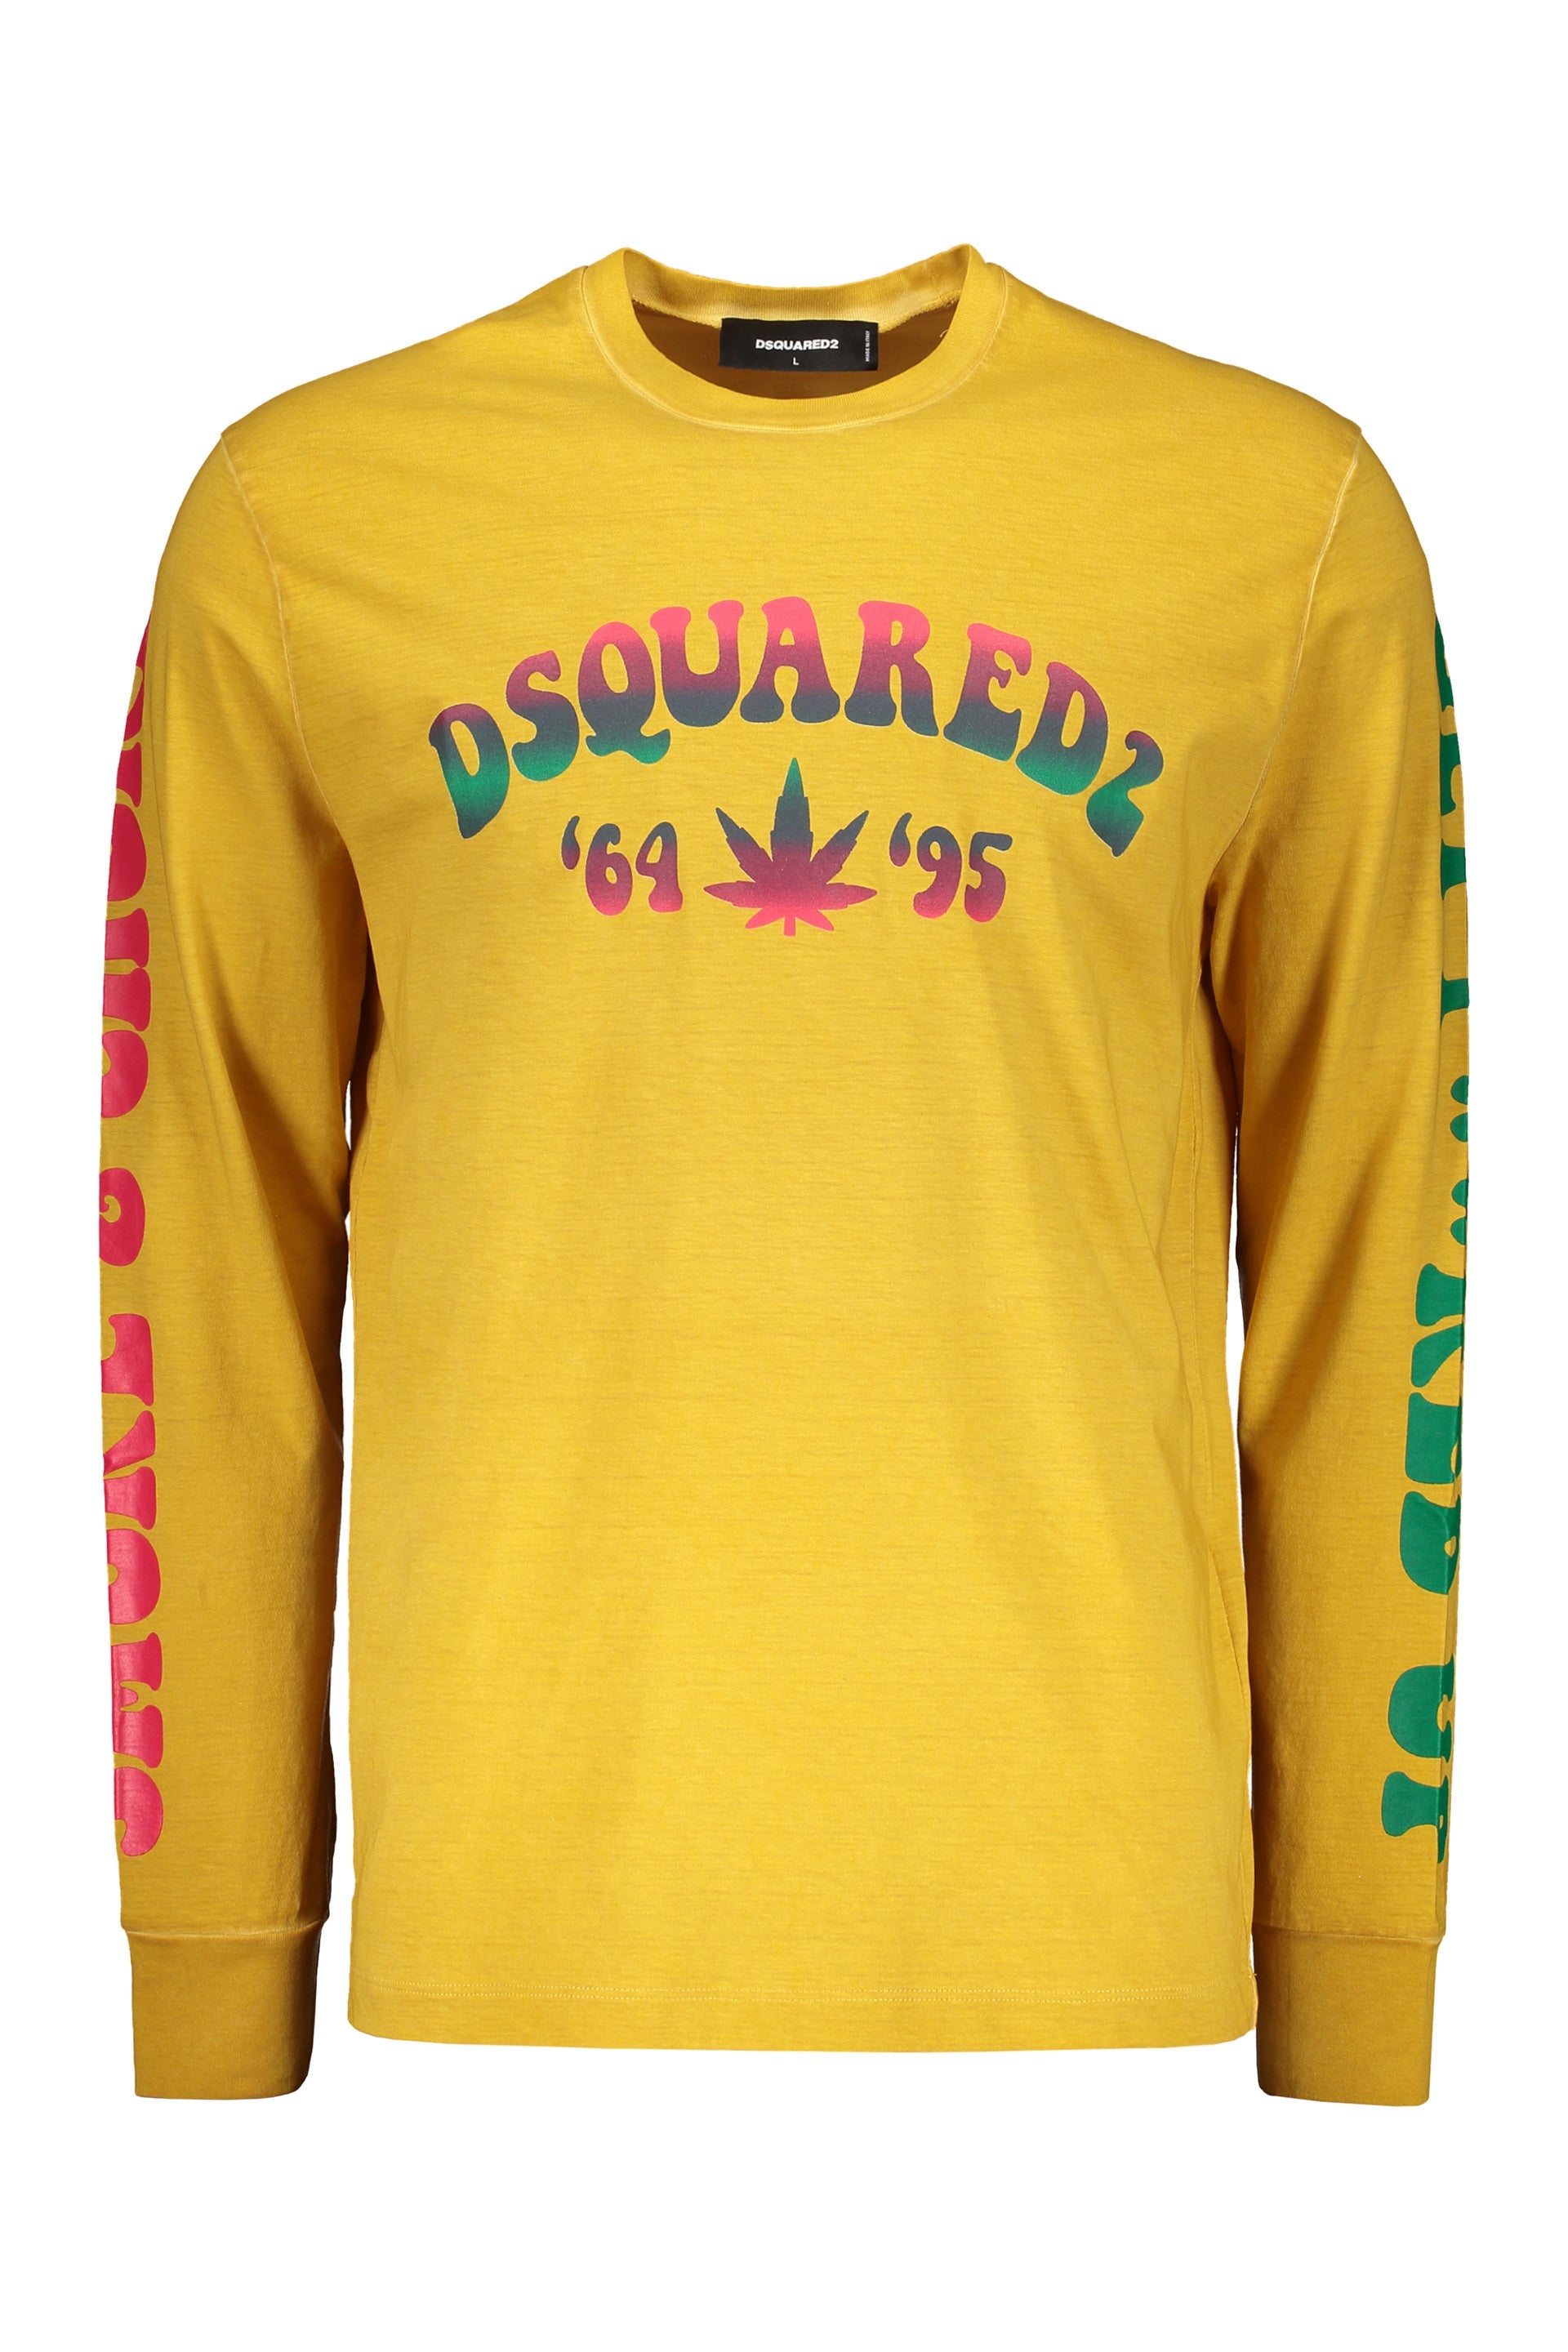 Dsquared2-OUTLET-SALE-Printed-cotton-T-shirt-Shirts-L-ARCHIVE-COLLECTION_63abe6e7-1a9b-4c6b-a414-a73ef85329ac.jpg